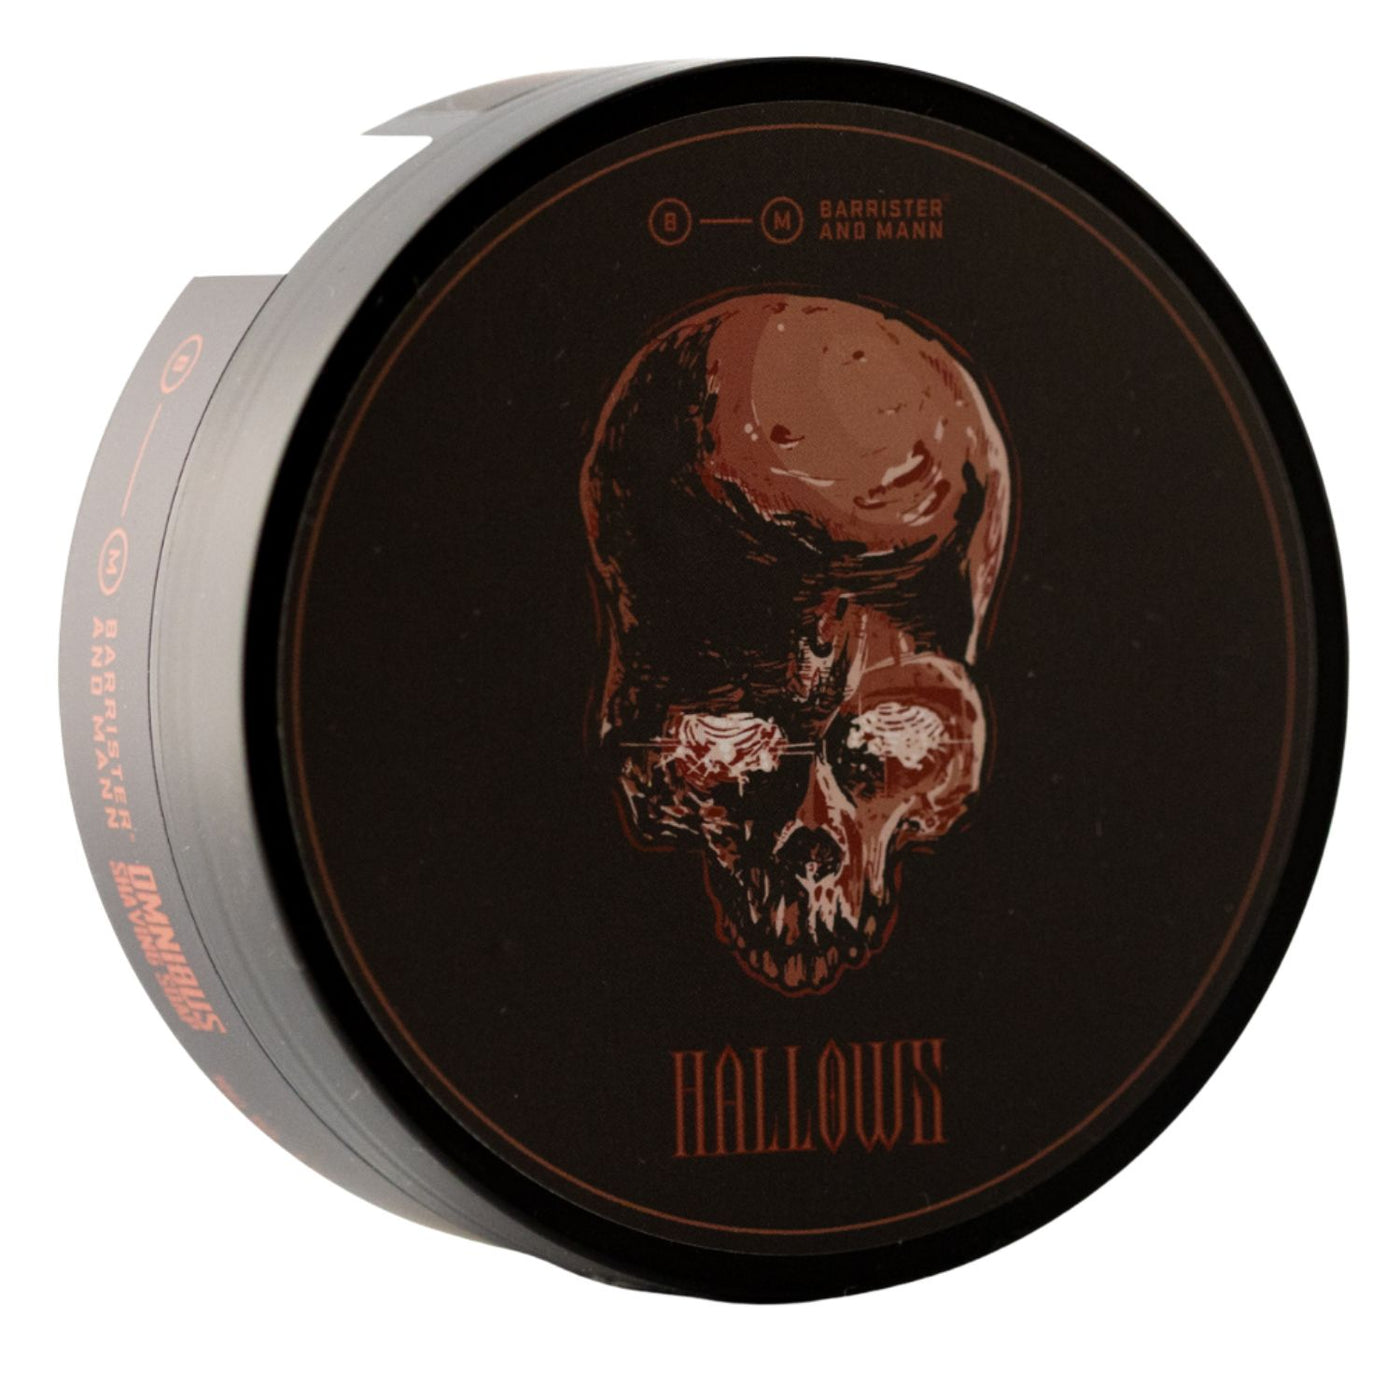 Barrister and Mann Hallows Shaving Soap (Omnibus Base)